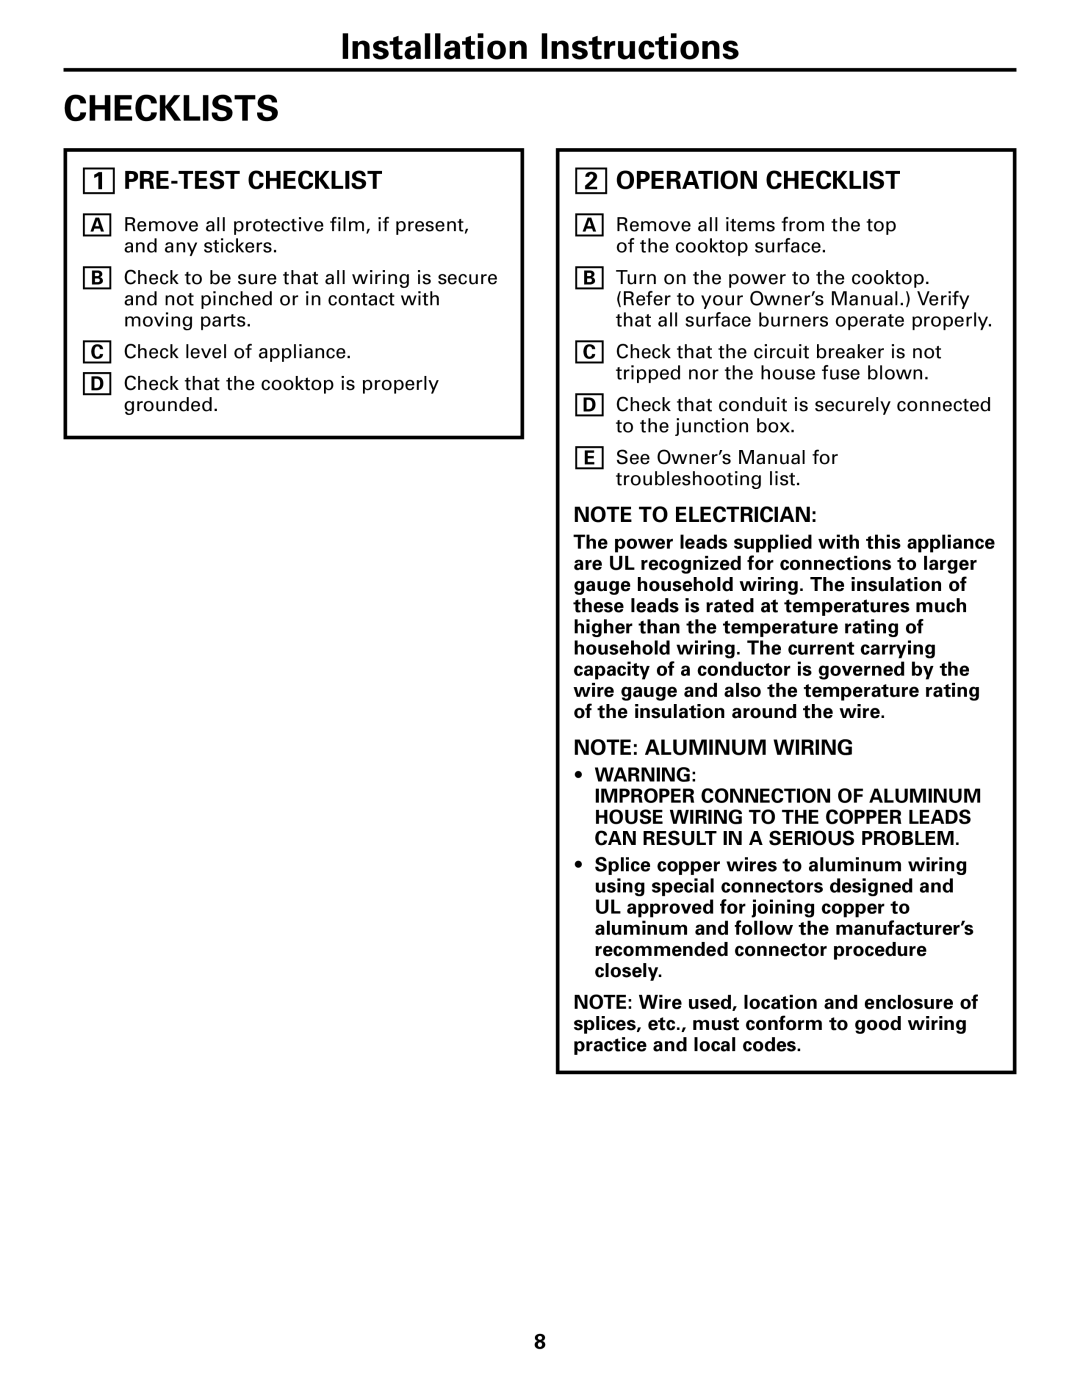 GE PP912, PP932, JP346 Installation Instructions CHECKLISTS, Pre-Testchecklist, Operation Checklist, Note To Electrician 